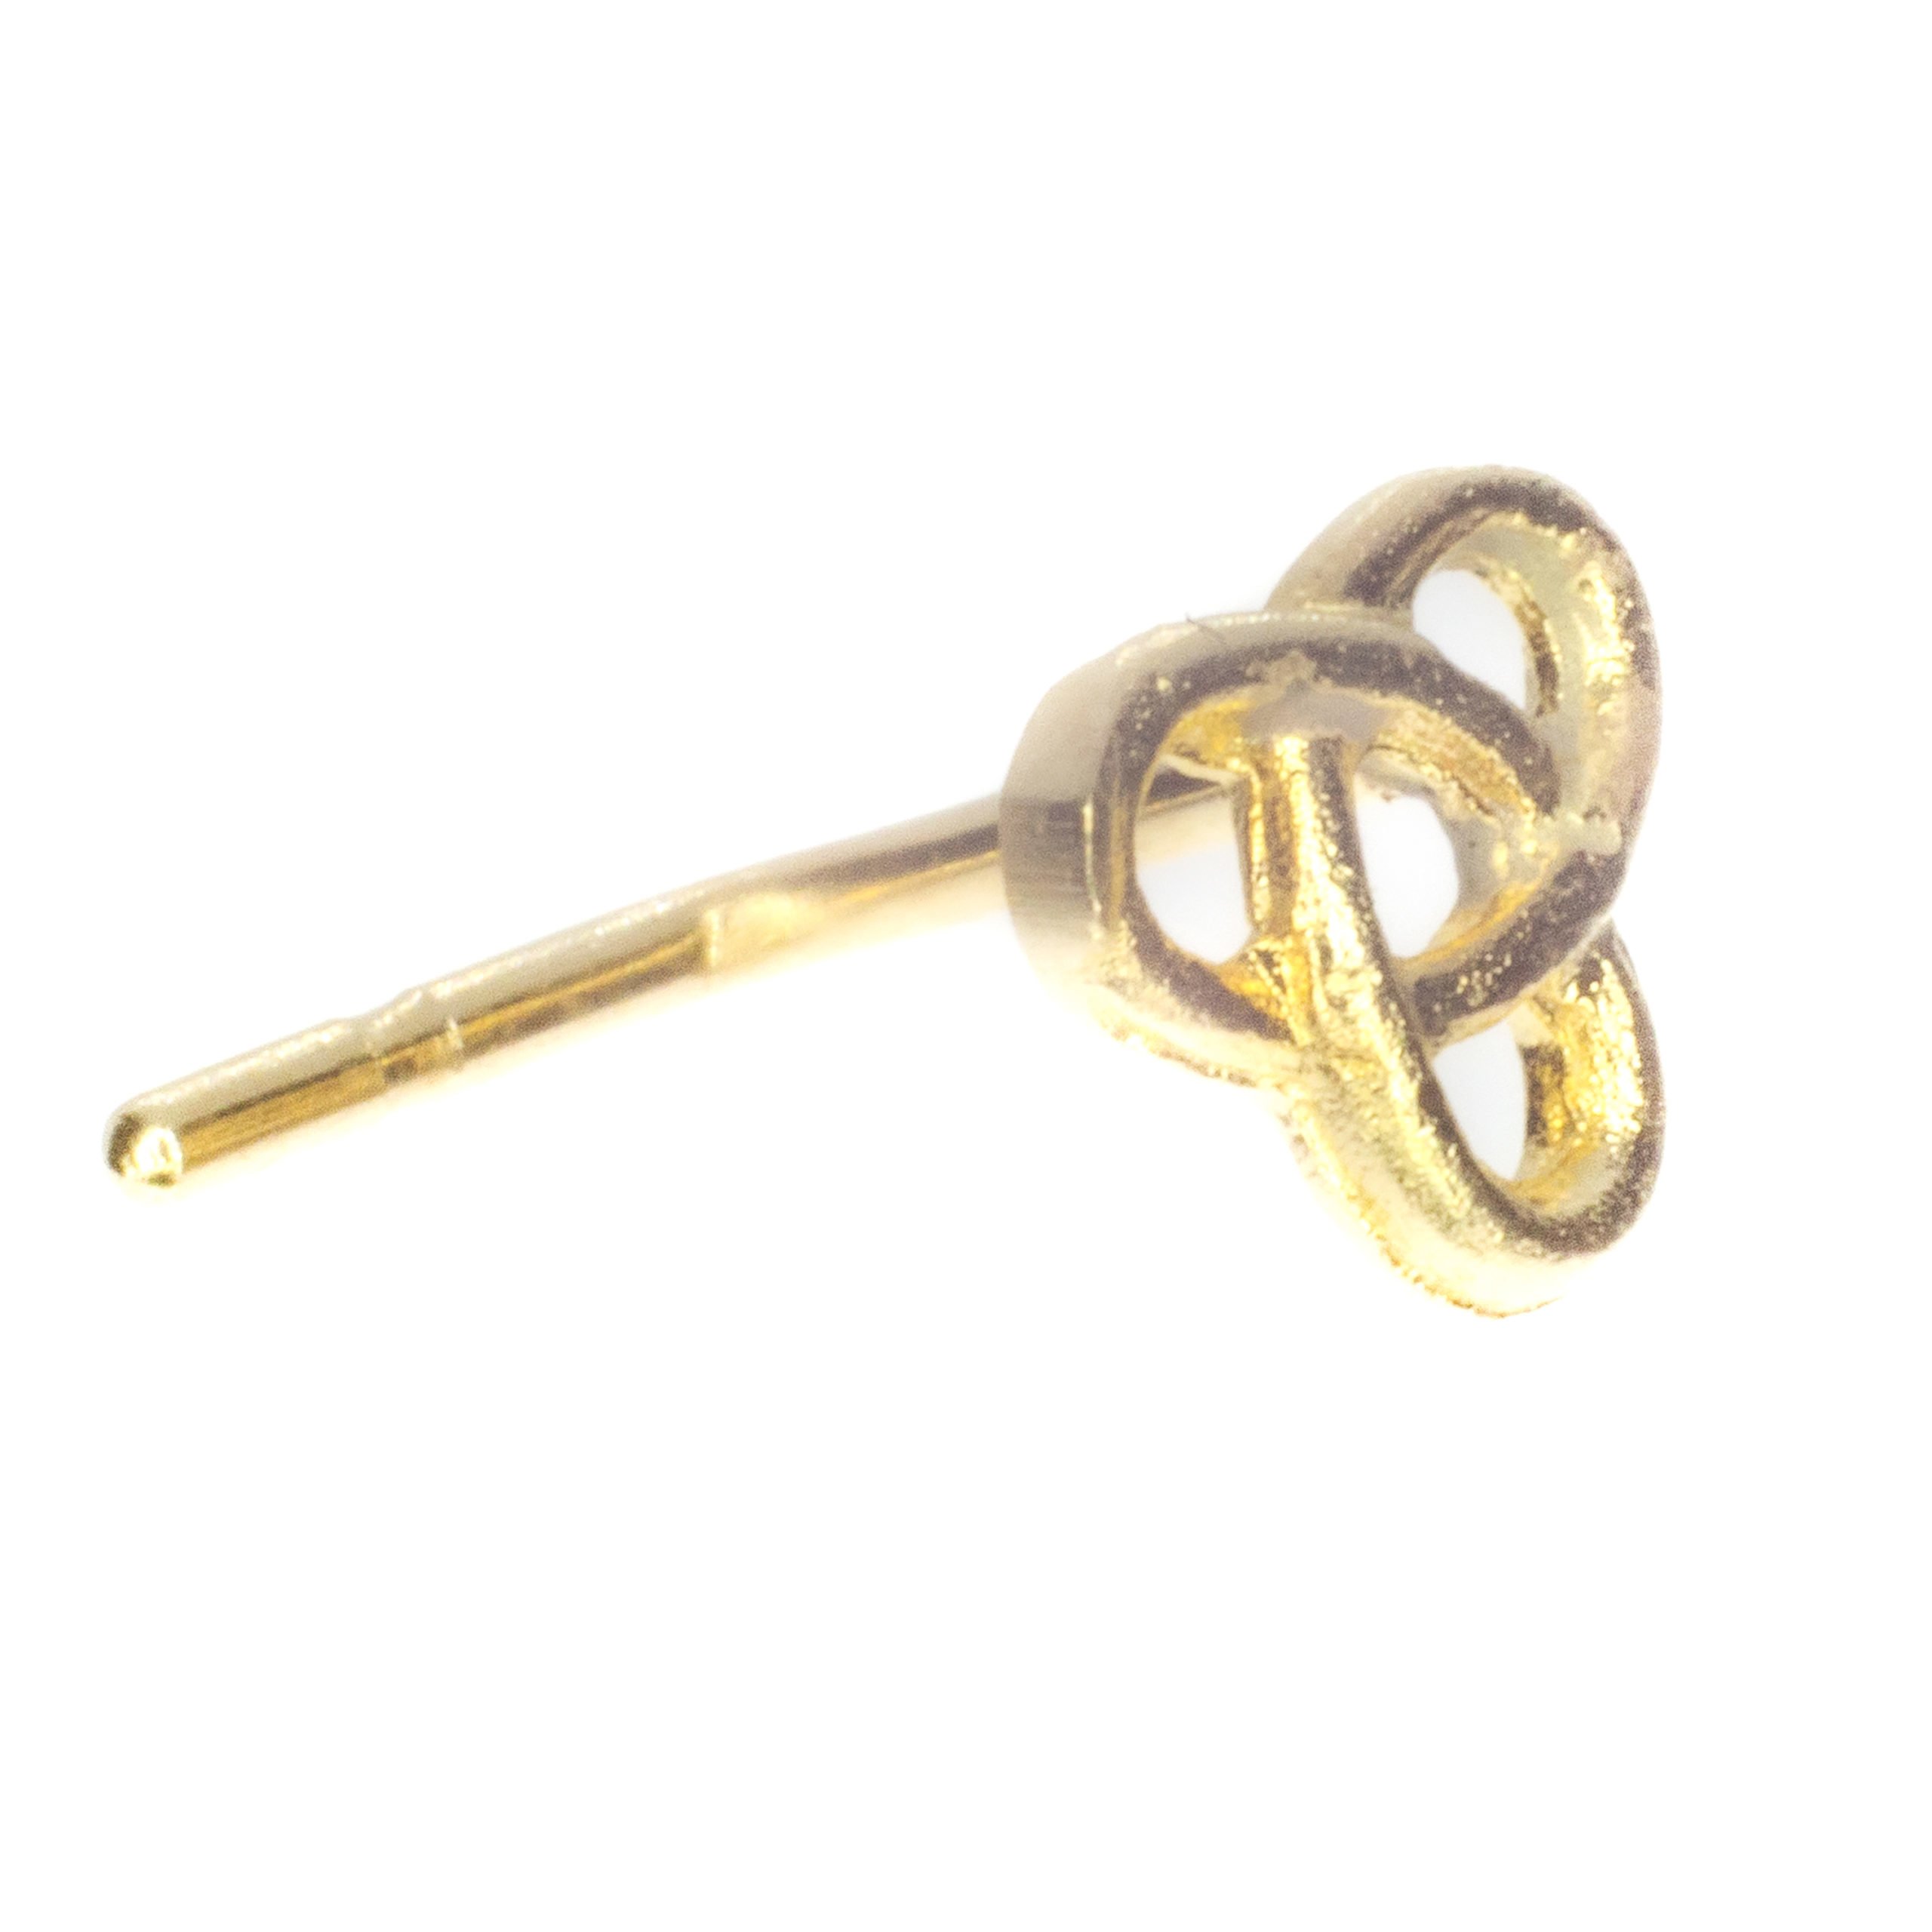 4mm Celtic nose stud in 9 carat yellow gold